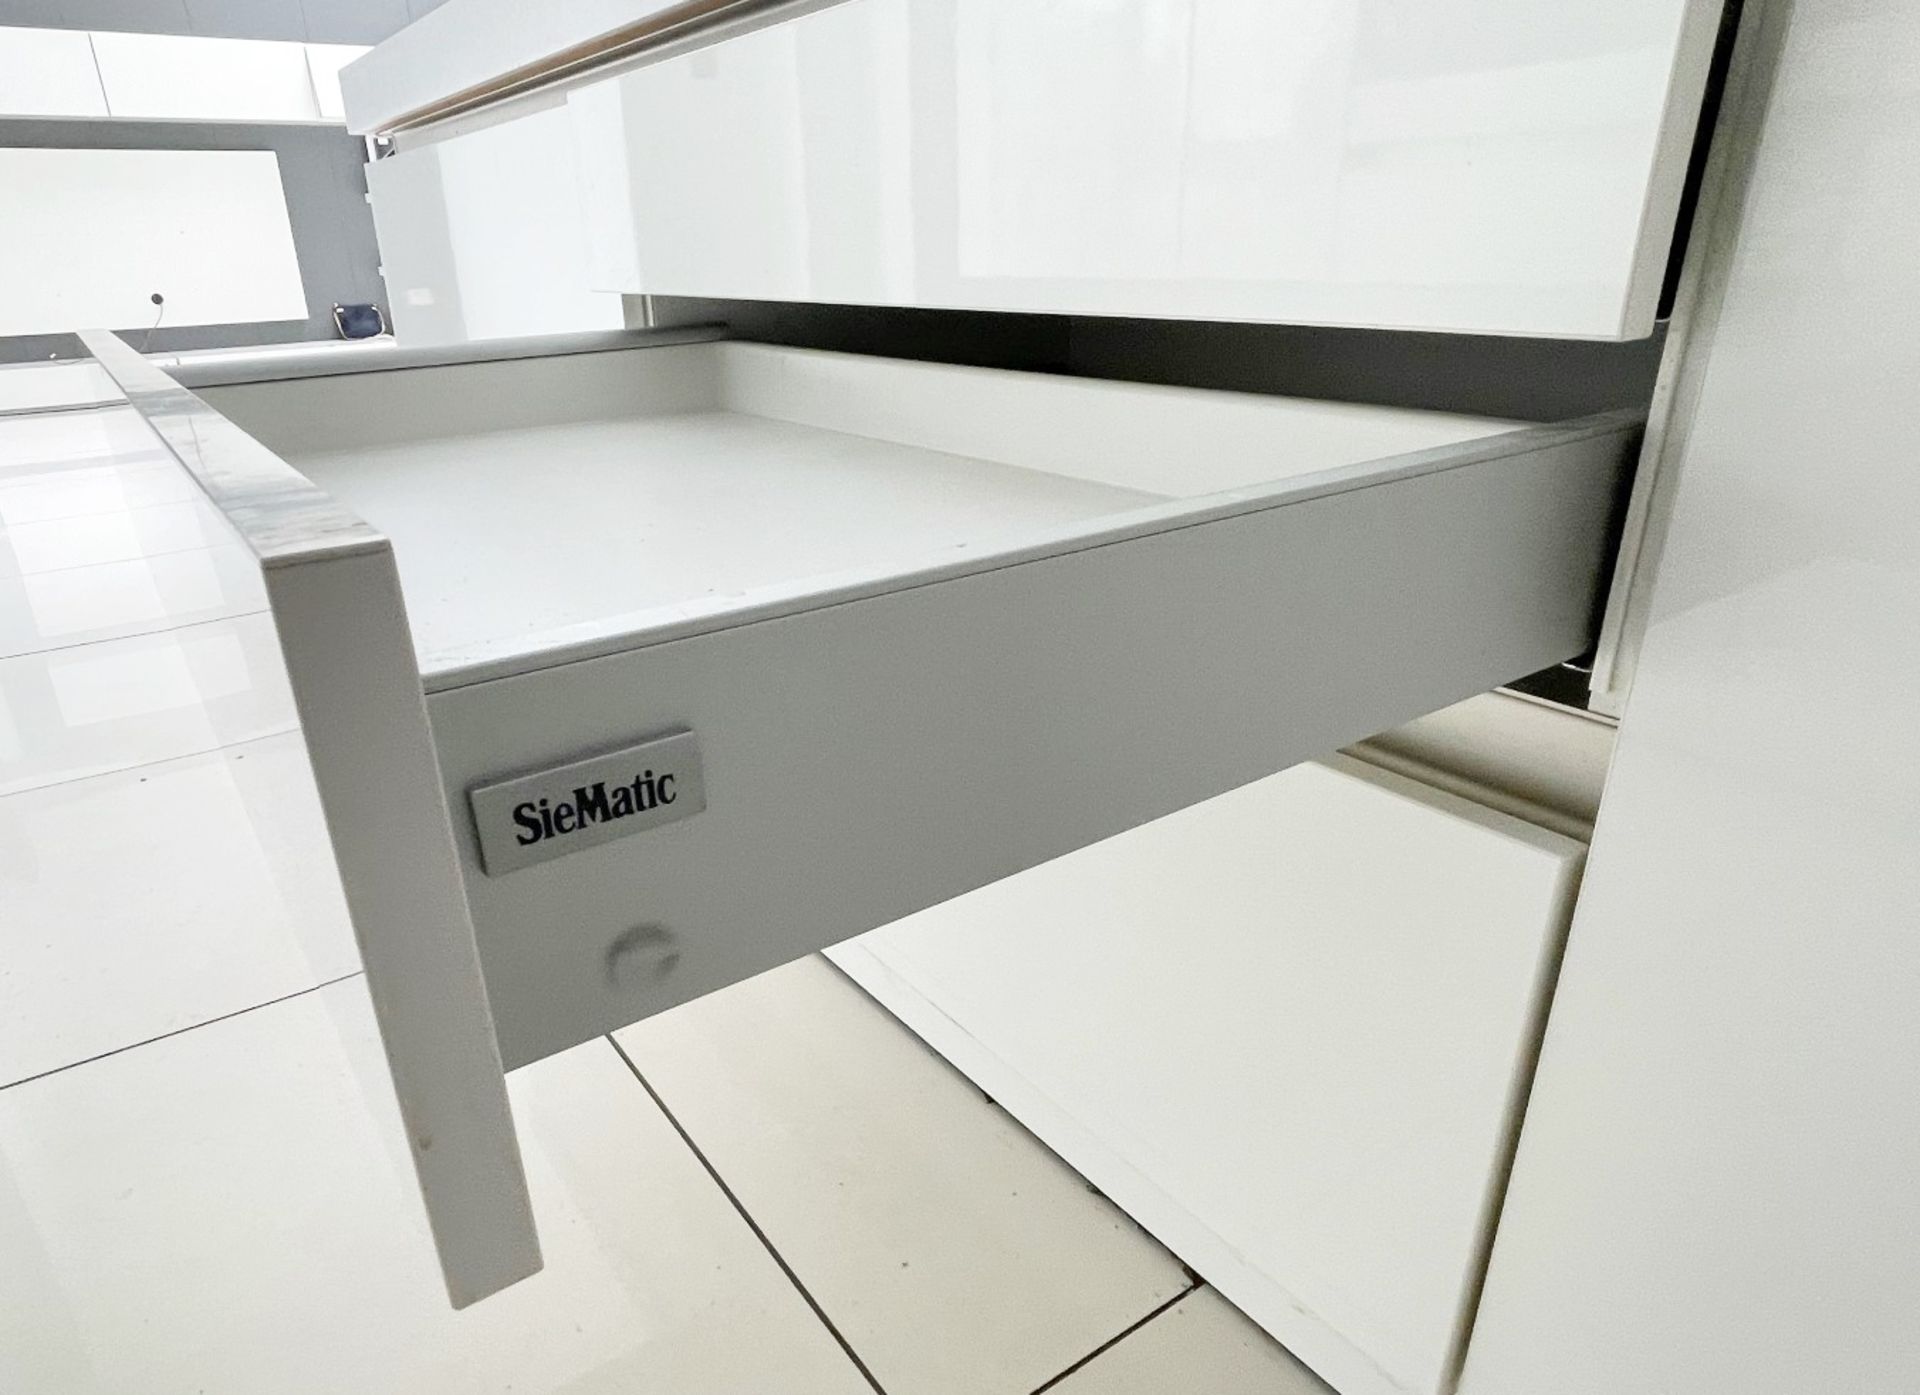 1 x SieMatic Contemporary Fitted Kitchen With Branded Appliances, Central Island + Corian Worktops - Image 50 of 100